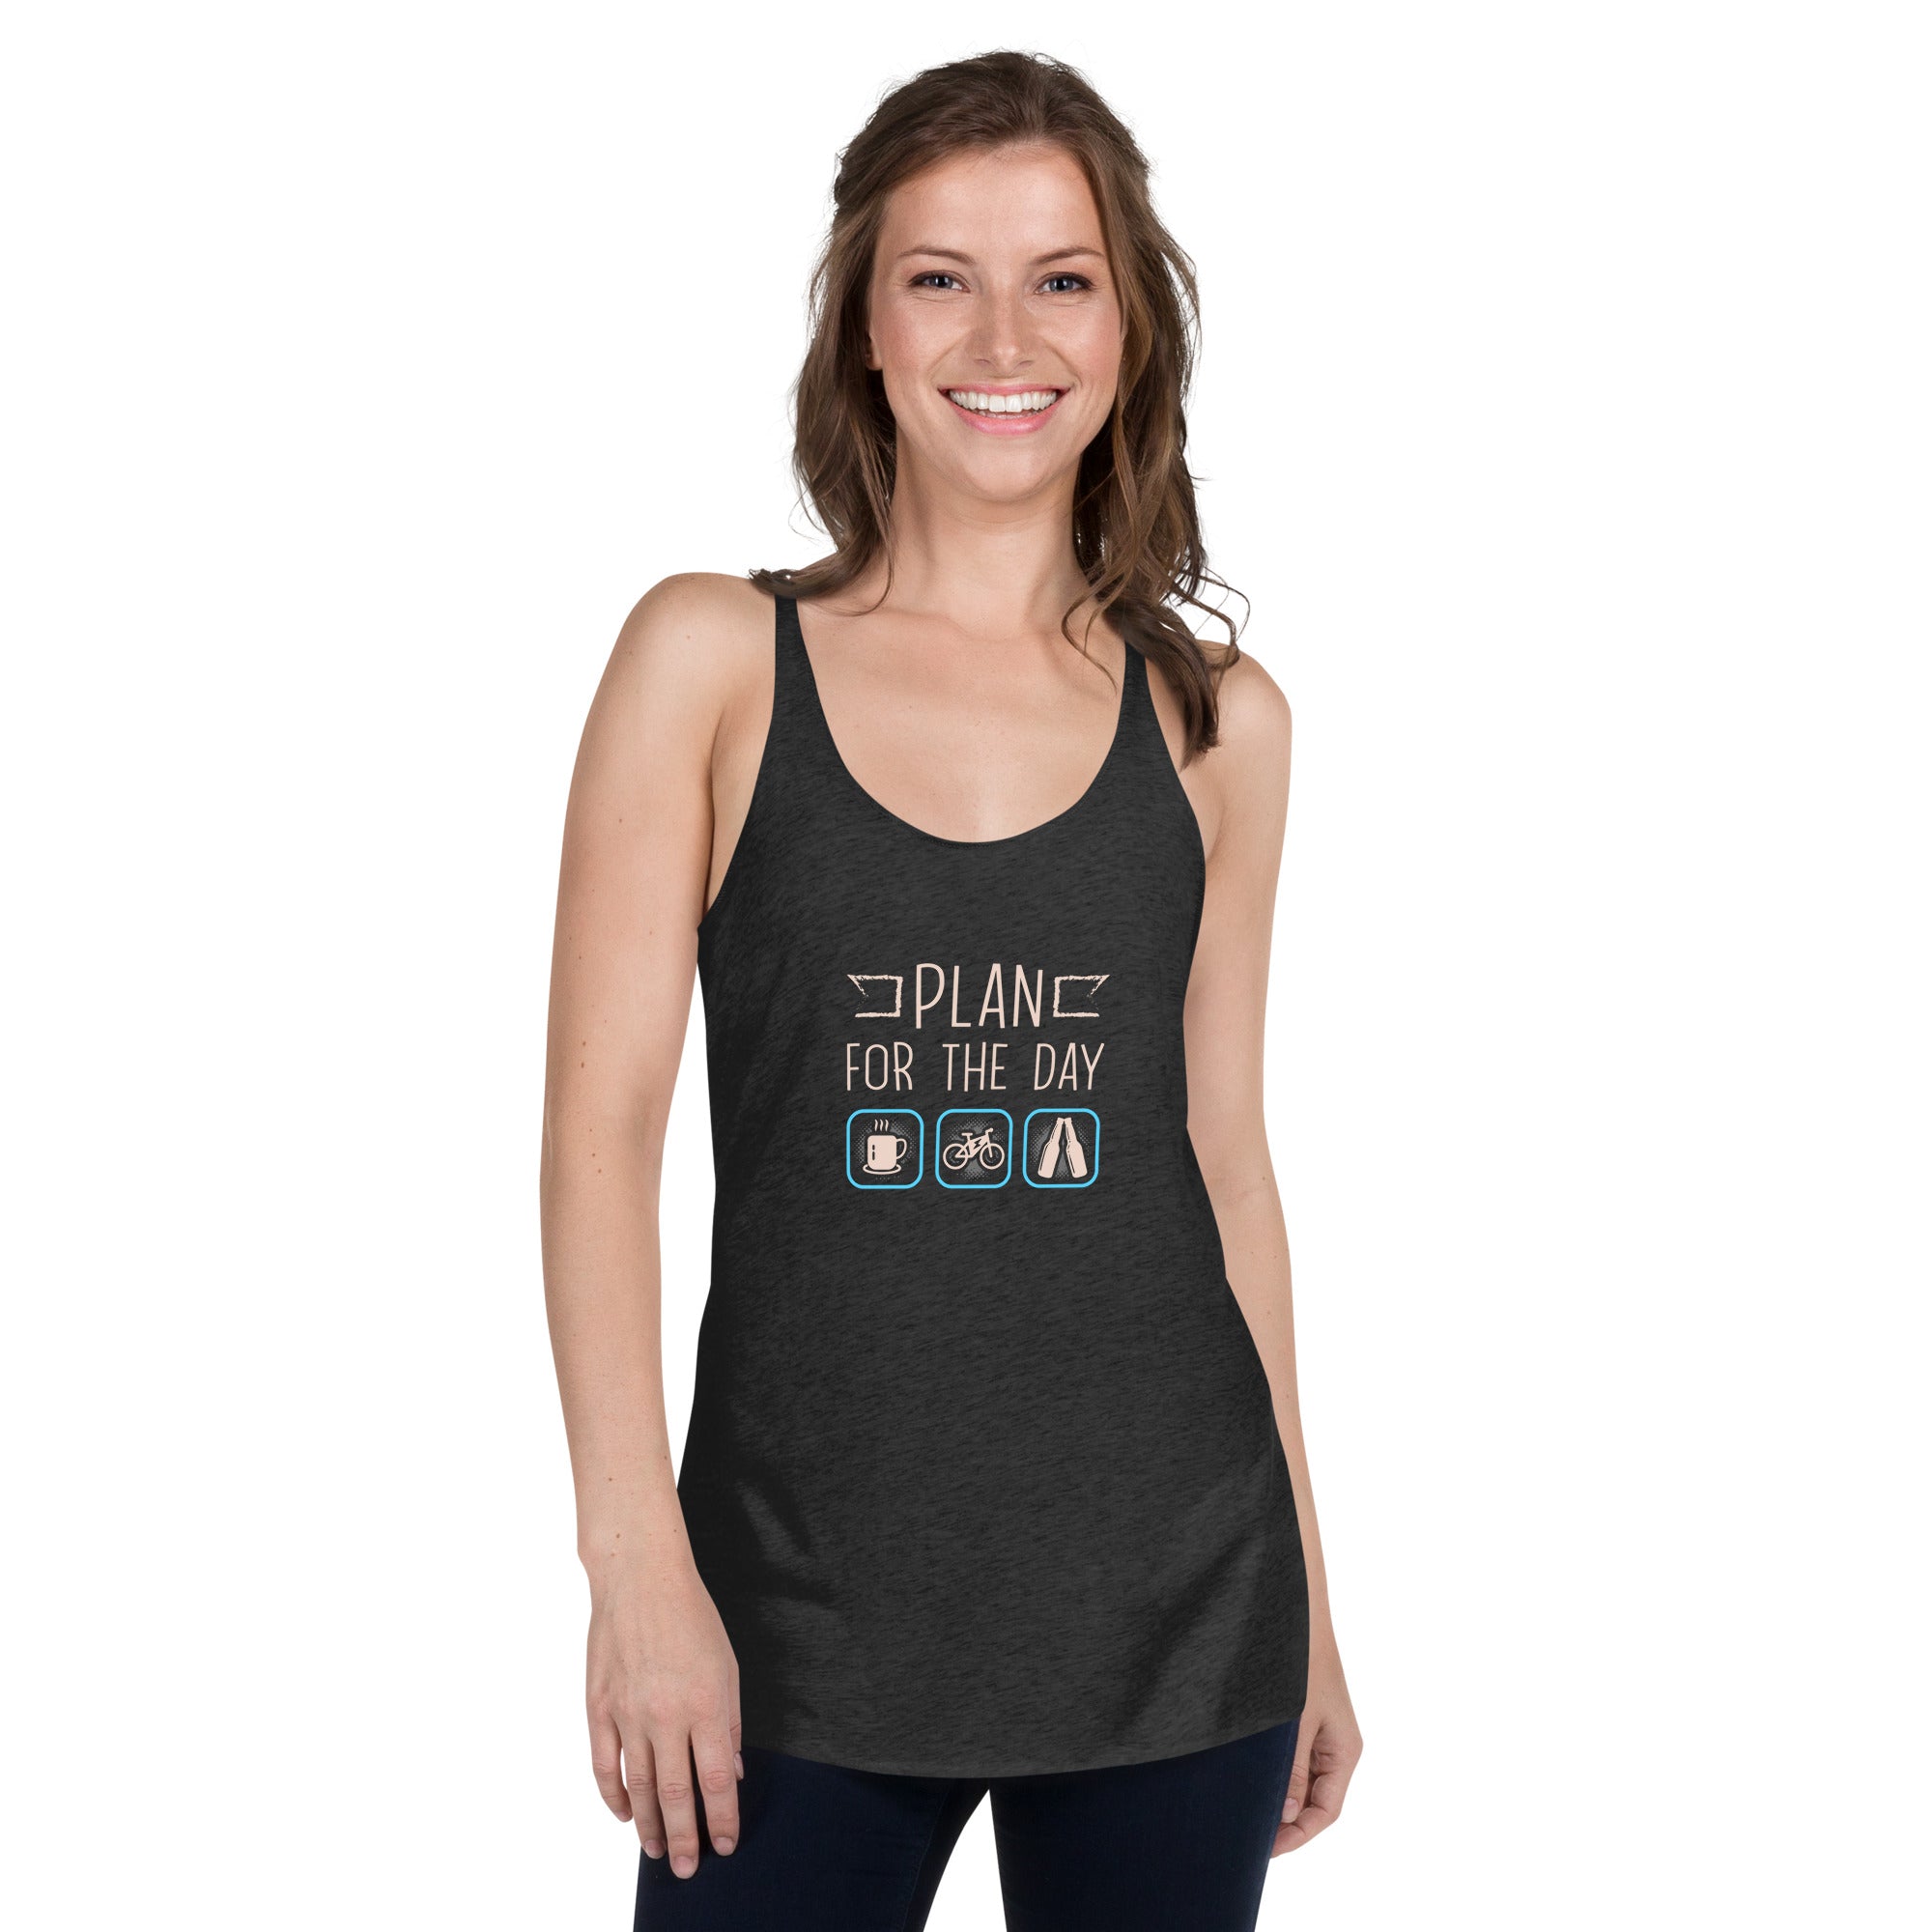 Plan for the Day "Coffee, E-bike, Beer" Next Level 6733 Women's Racerback Tank Top Black